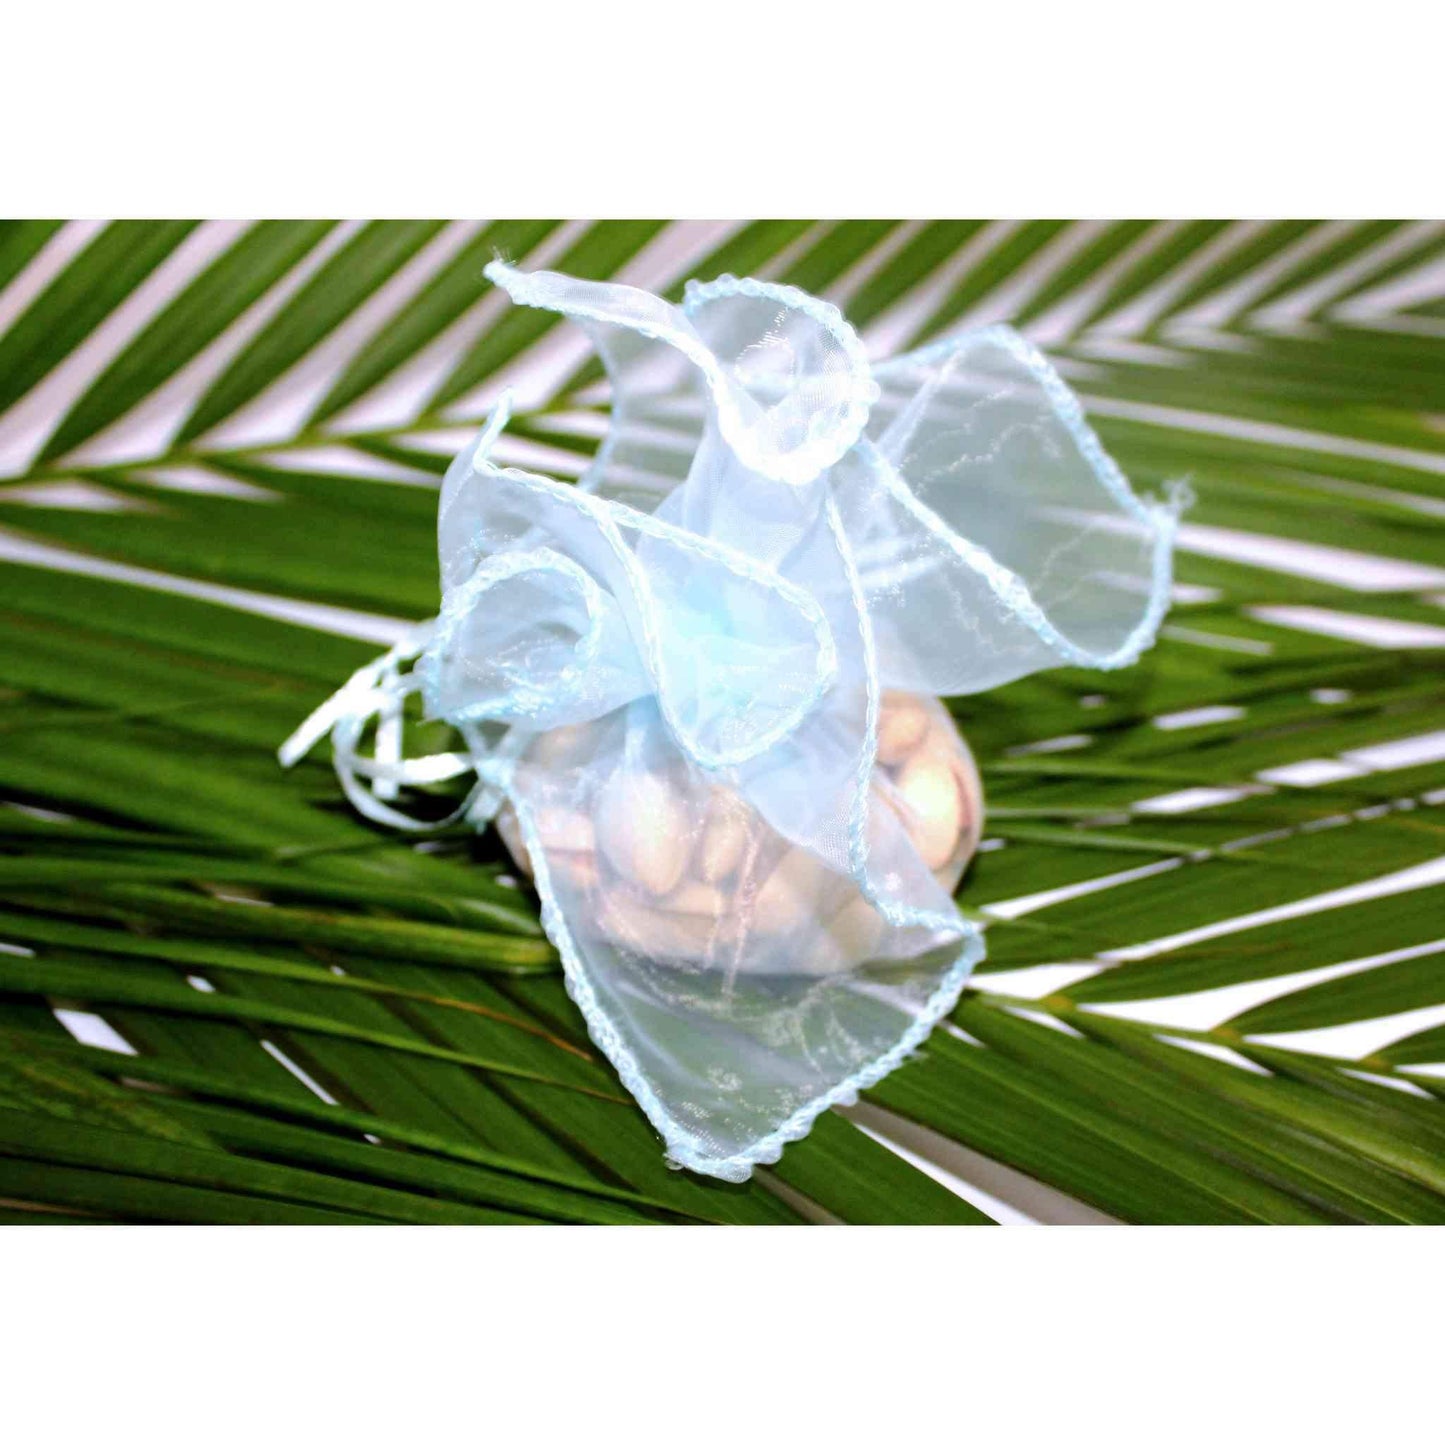 Durable Reusable multi-purpose Translucent Net with pull Strings Gift Bag Potli (Pack of 10) Holds Up to 2Kg, Sky Blue - Indian Petals